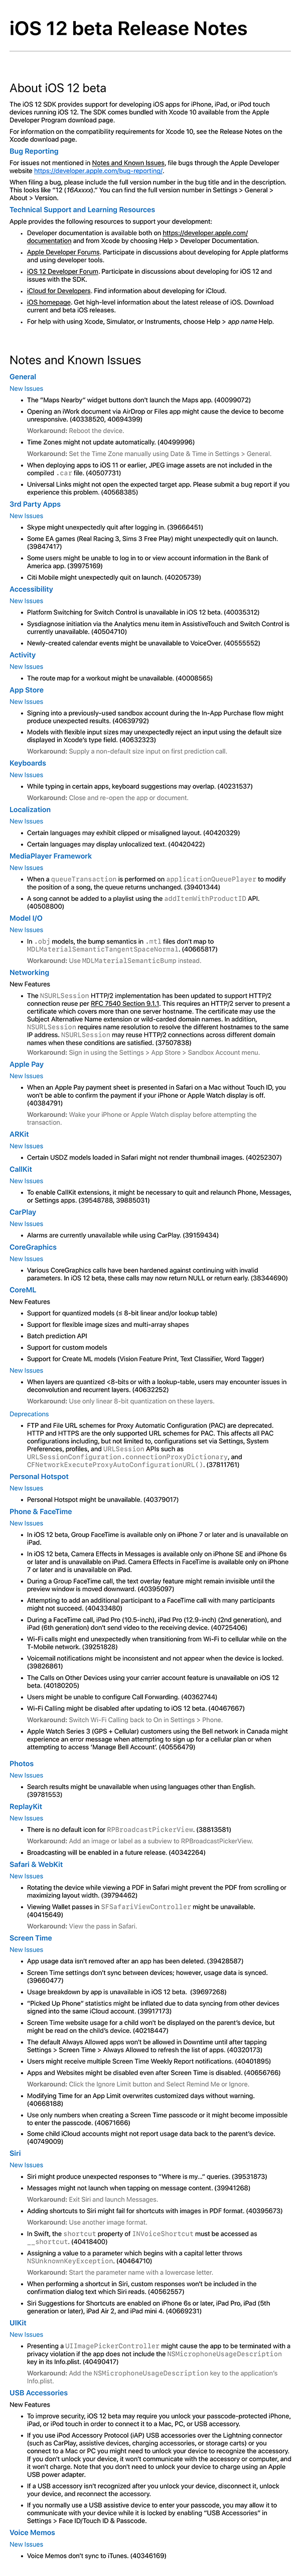 iOS 12 List of Changes PROBLEMS 1